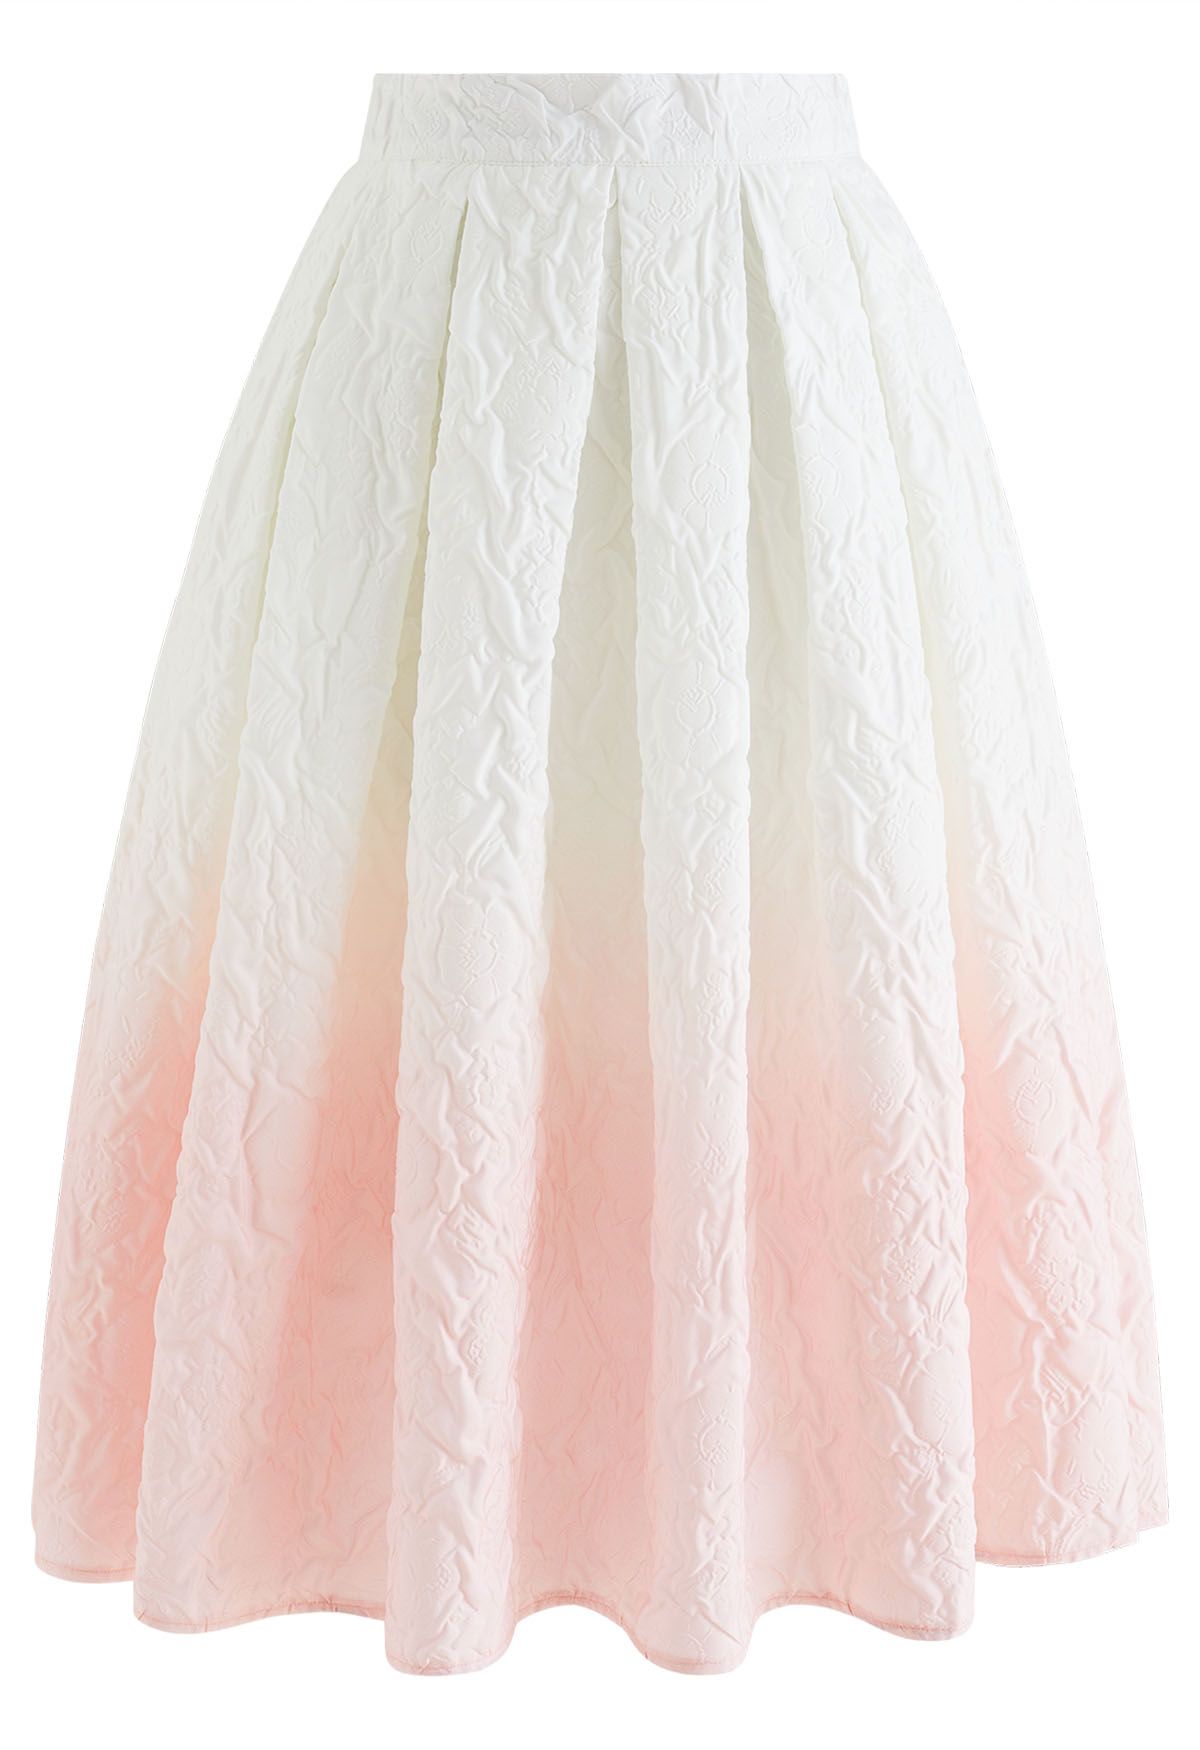 Ombre Embossed Floral Pleated Midi Skirt in Pink